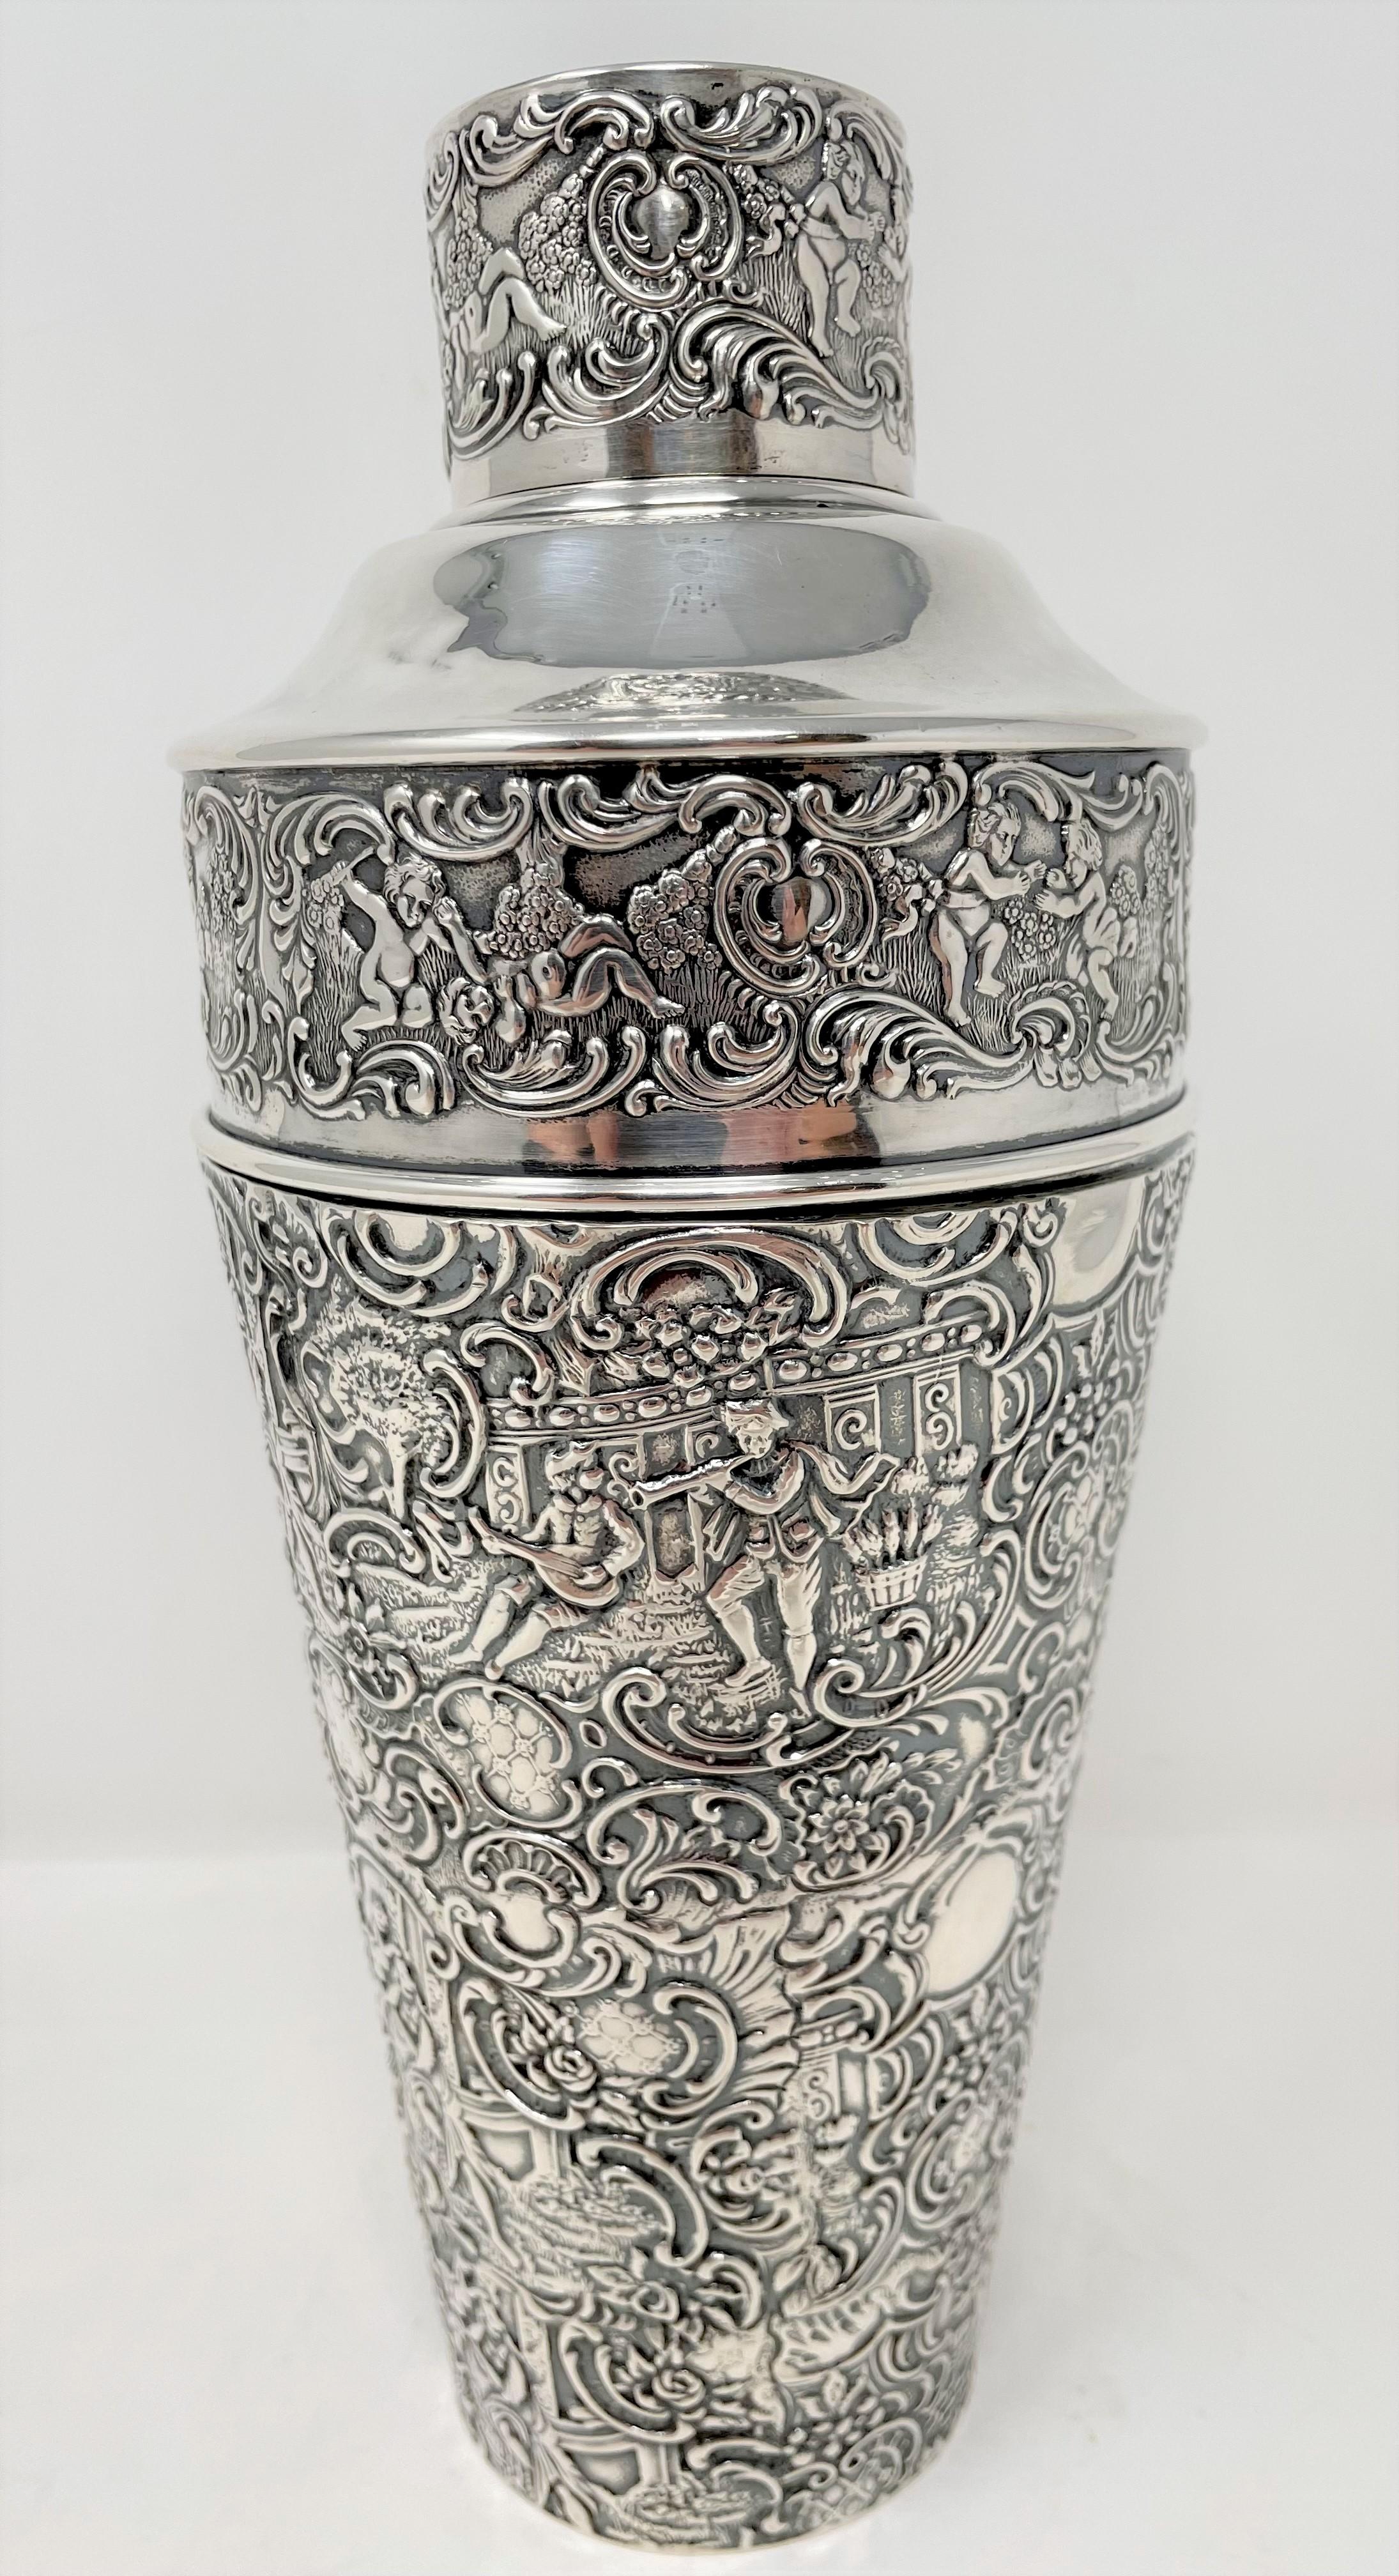 Antique American repousse sterling silver cocktail shaker, Circa 1920's.